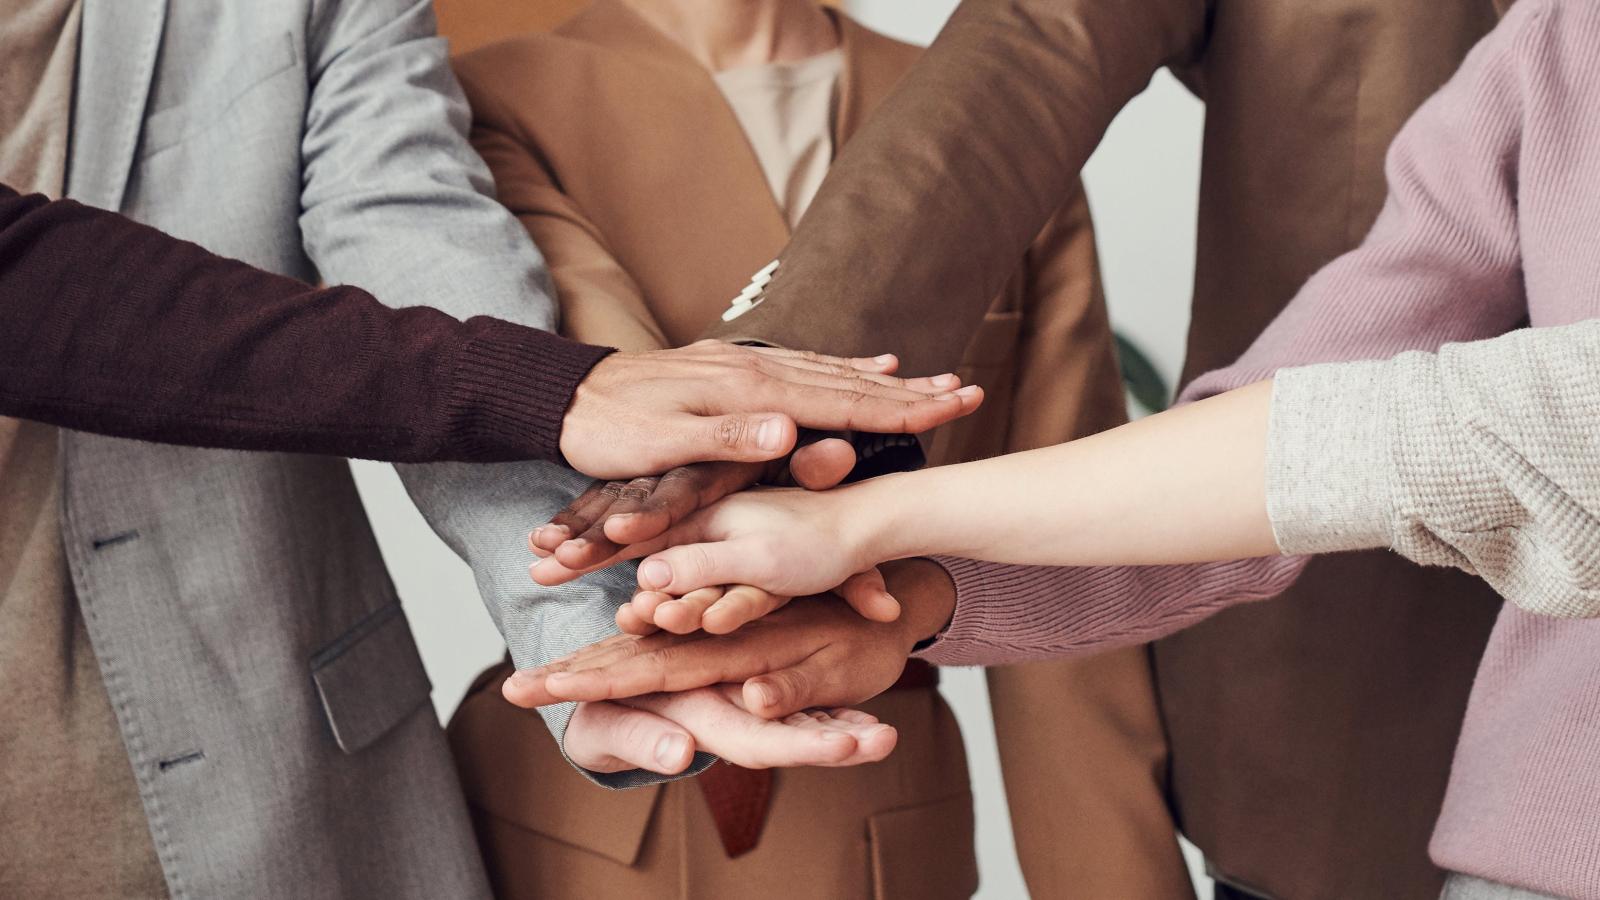 A group of people meeting hands in the centre